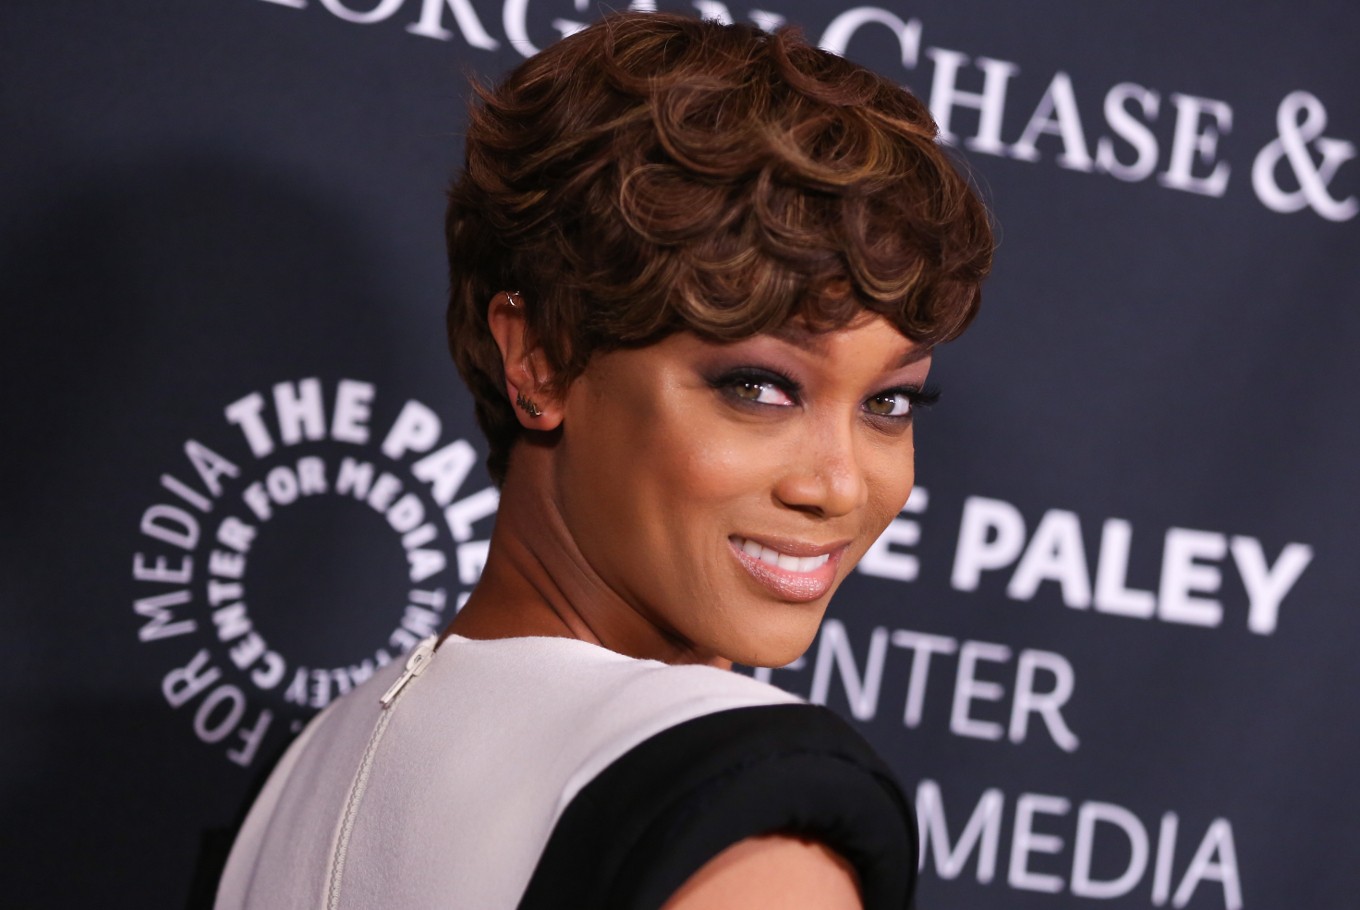 Tyra Banks To Star In Life Size 2 Wants Lindsay Lohan Back Entertainment The Jakarta Post